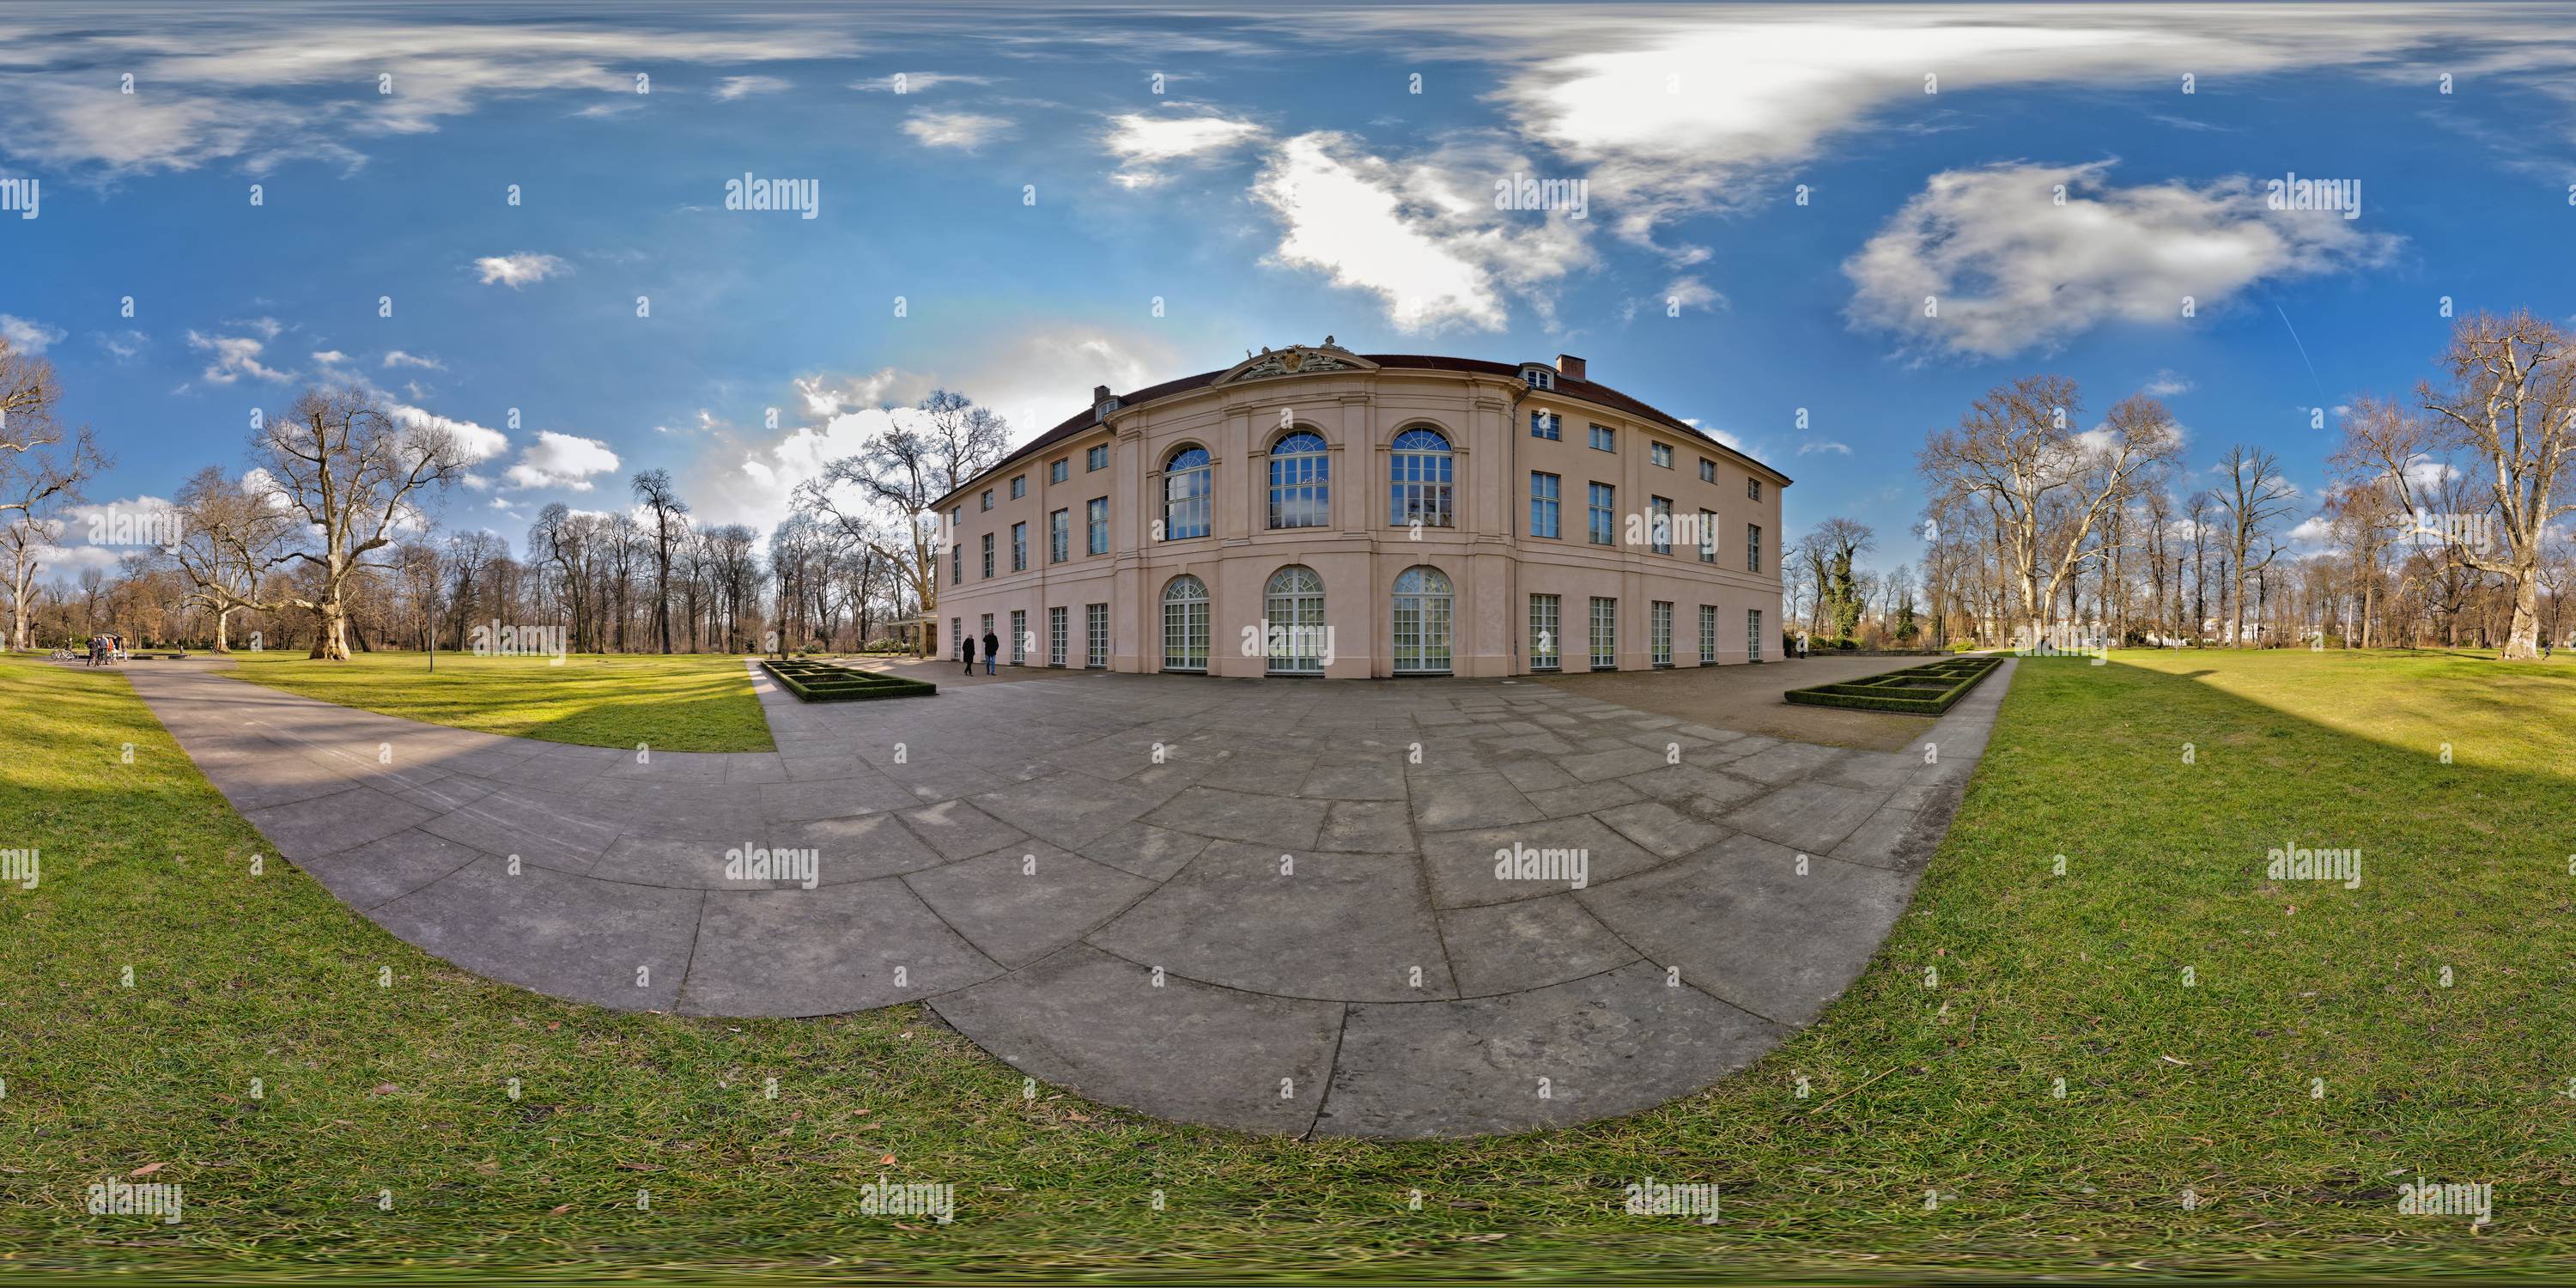 360 degree panoramic view of Schlosspark Pankow 3